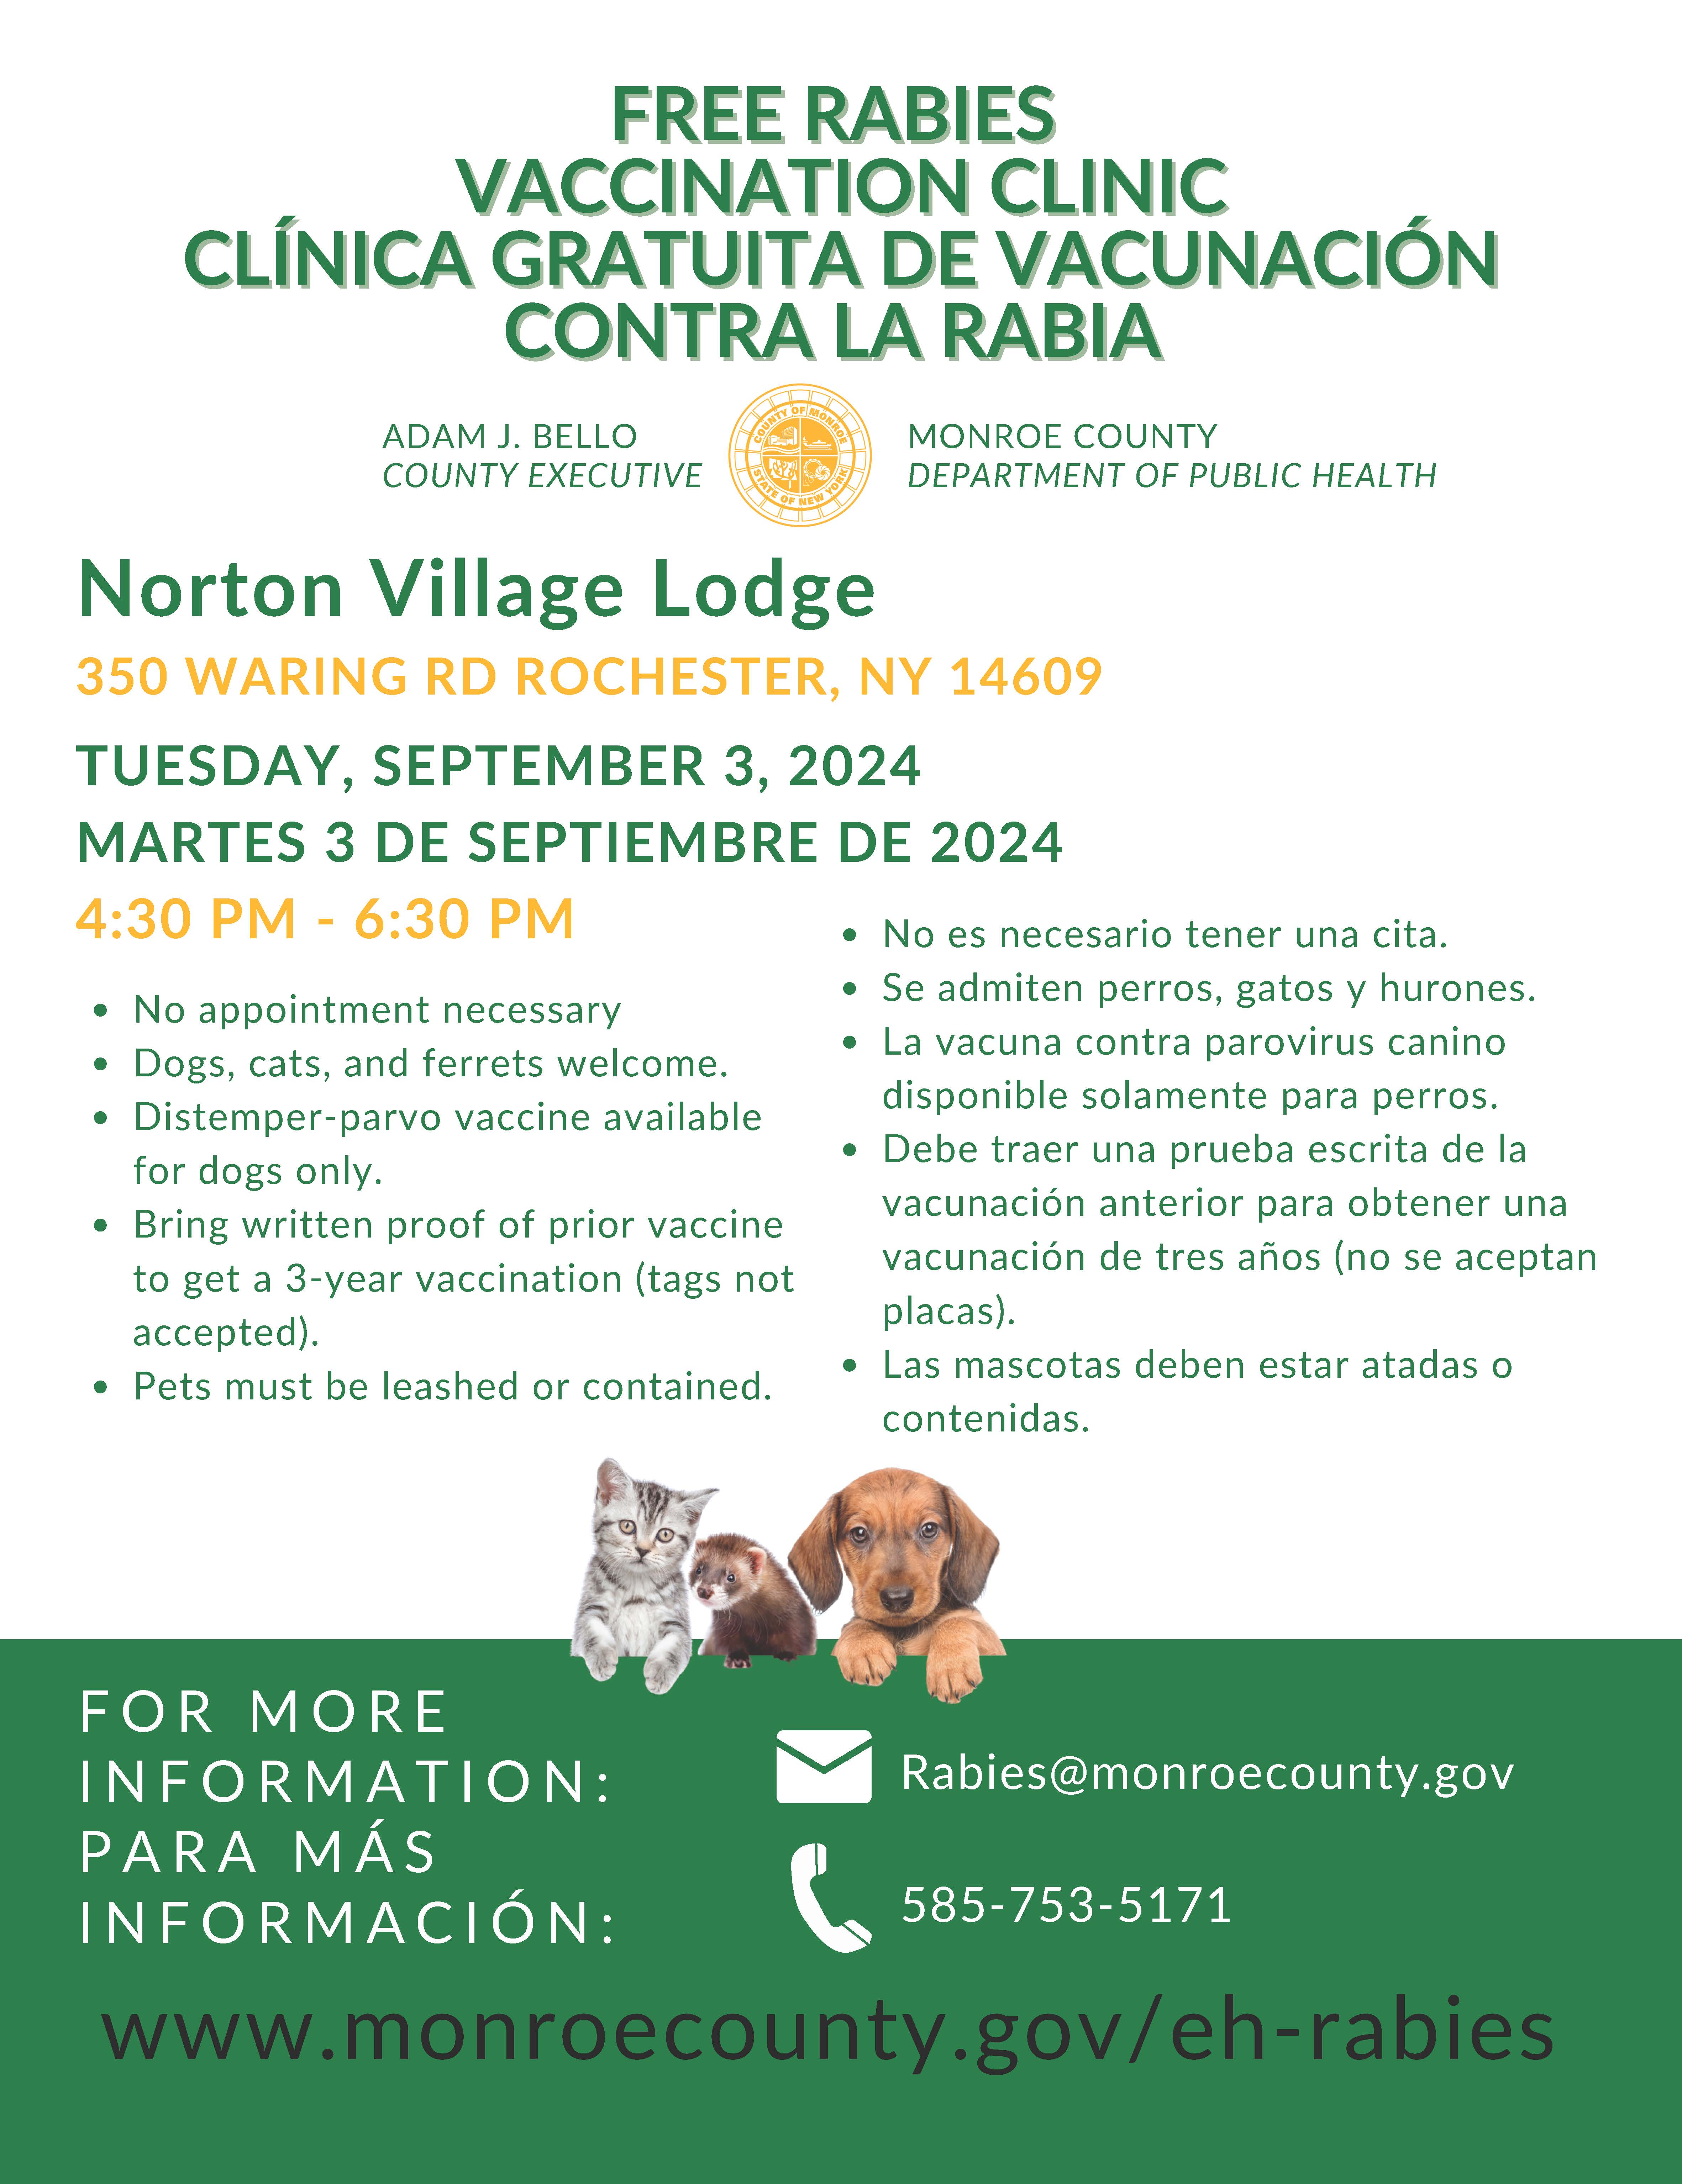 Free Rabies Vaccination Clinic Flyer 9.3.2024